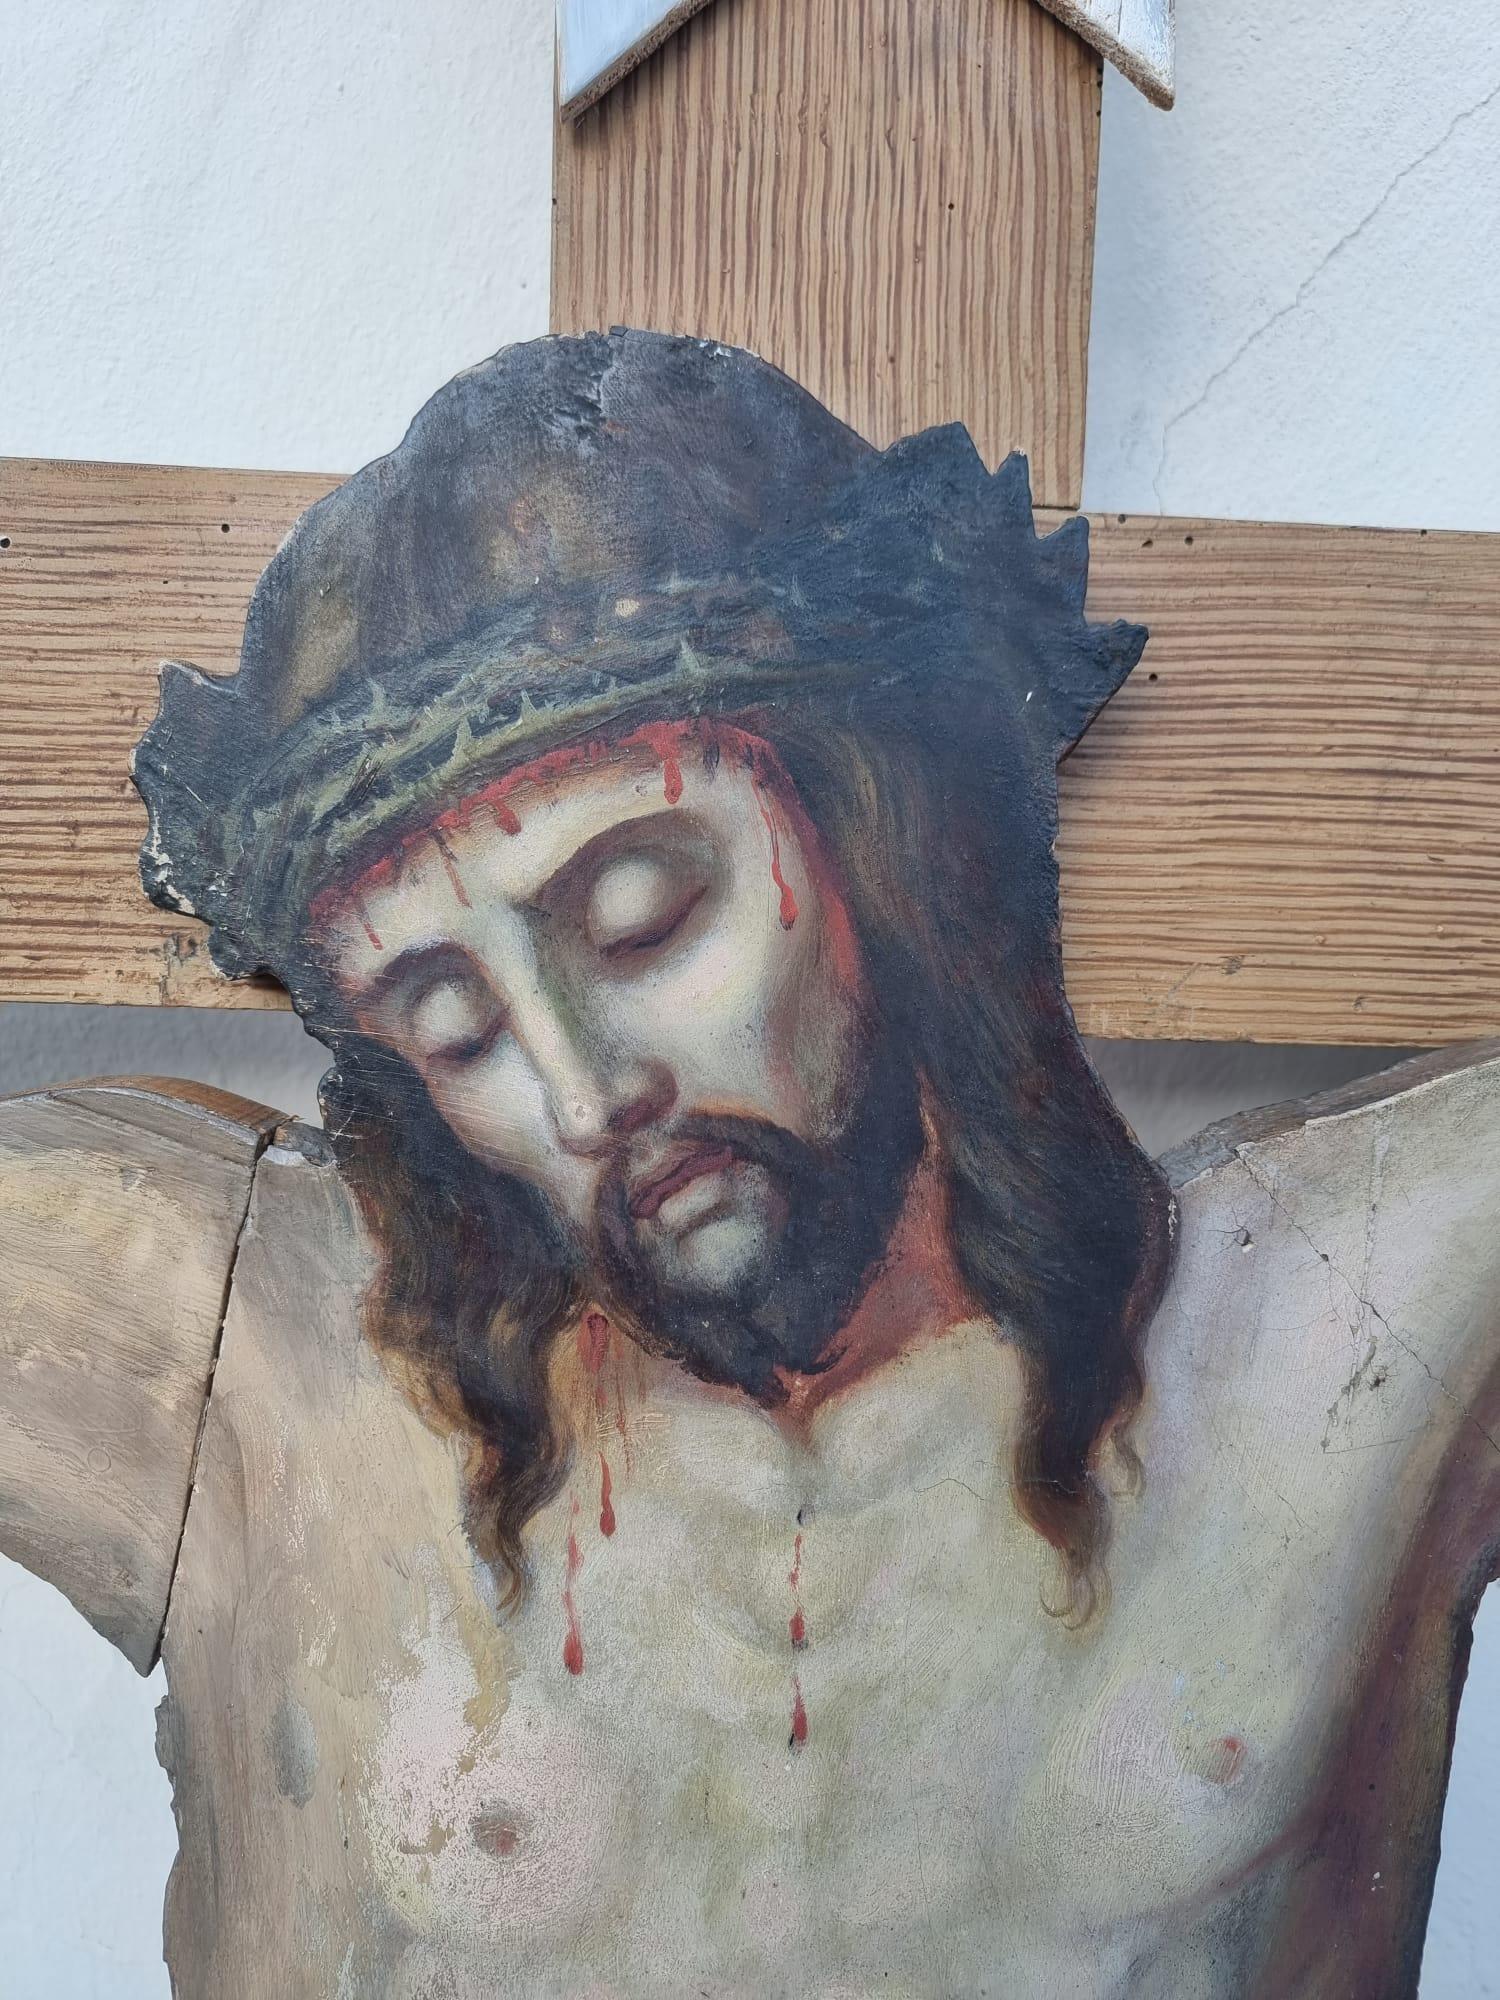 Magnificent crucifix in painted wood, mounted on line crosses, 19th century, Trentino.

Dimensions: 171.50x112cm